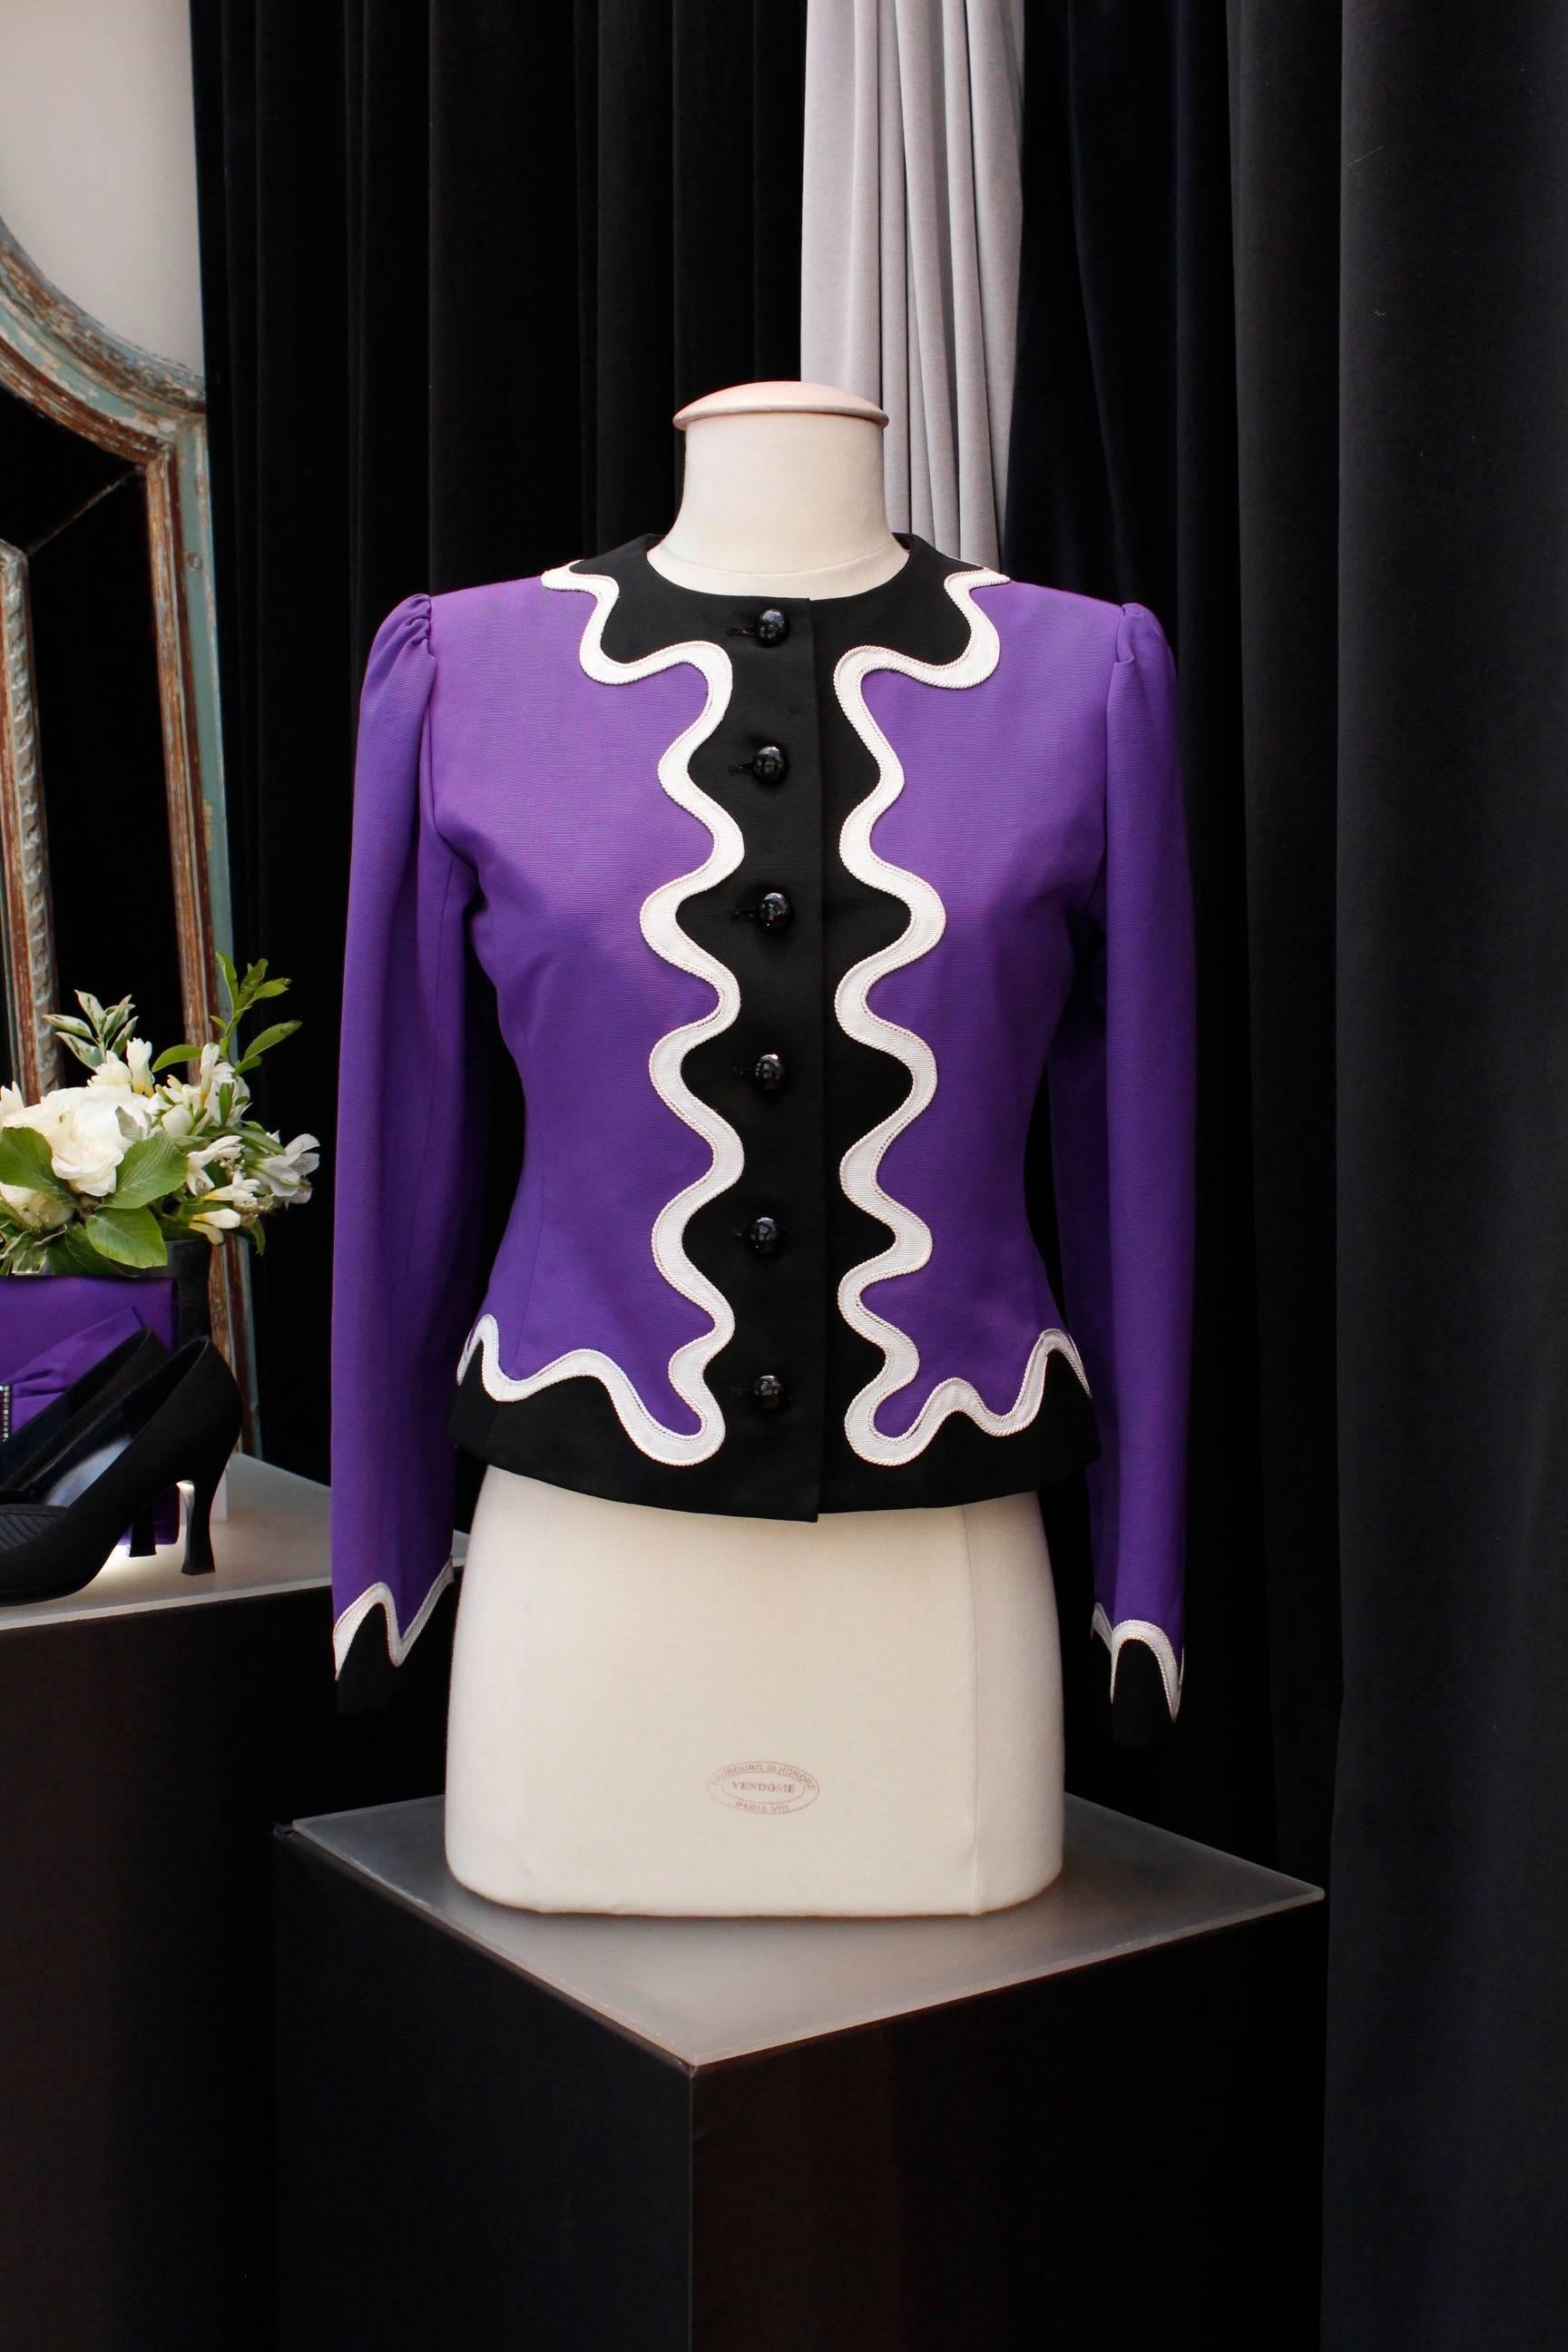 Yves Saint Laurent Rive Gauche dress and jacket set in purple, black and white  For Sale 1